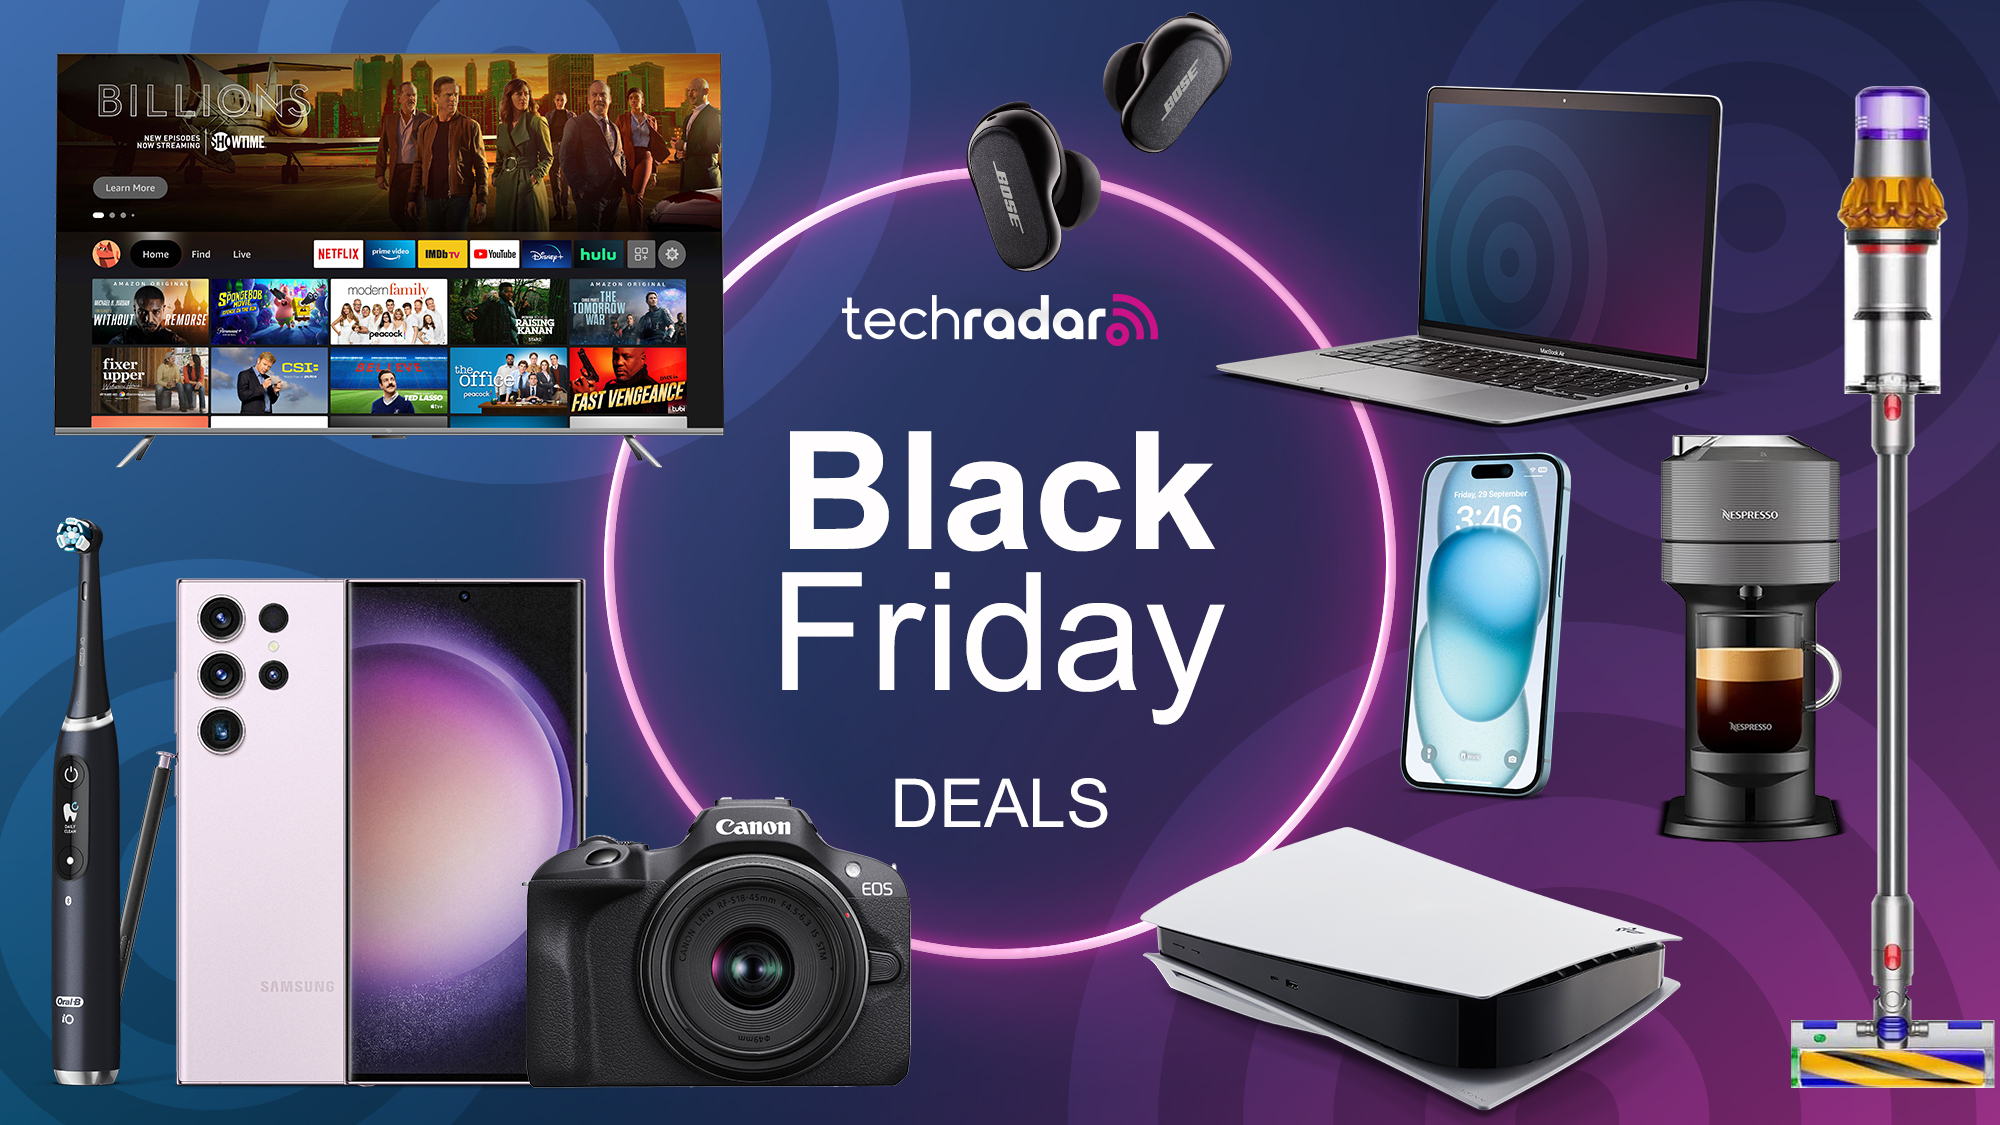 A List Of Black Friday Deals, Combos & Offers You Just Can't Miss